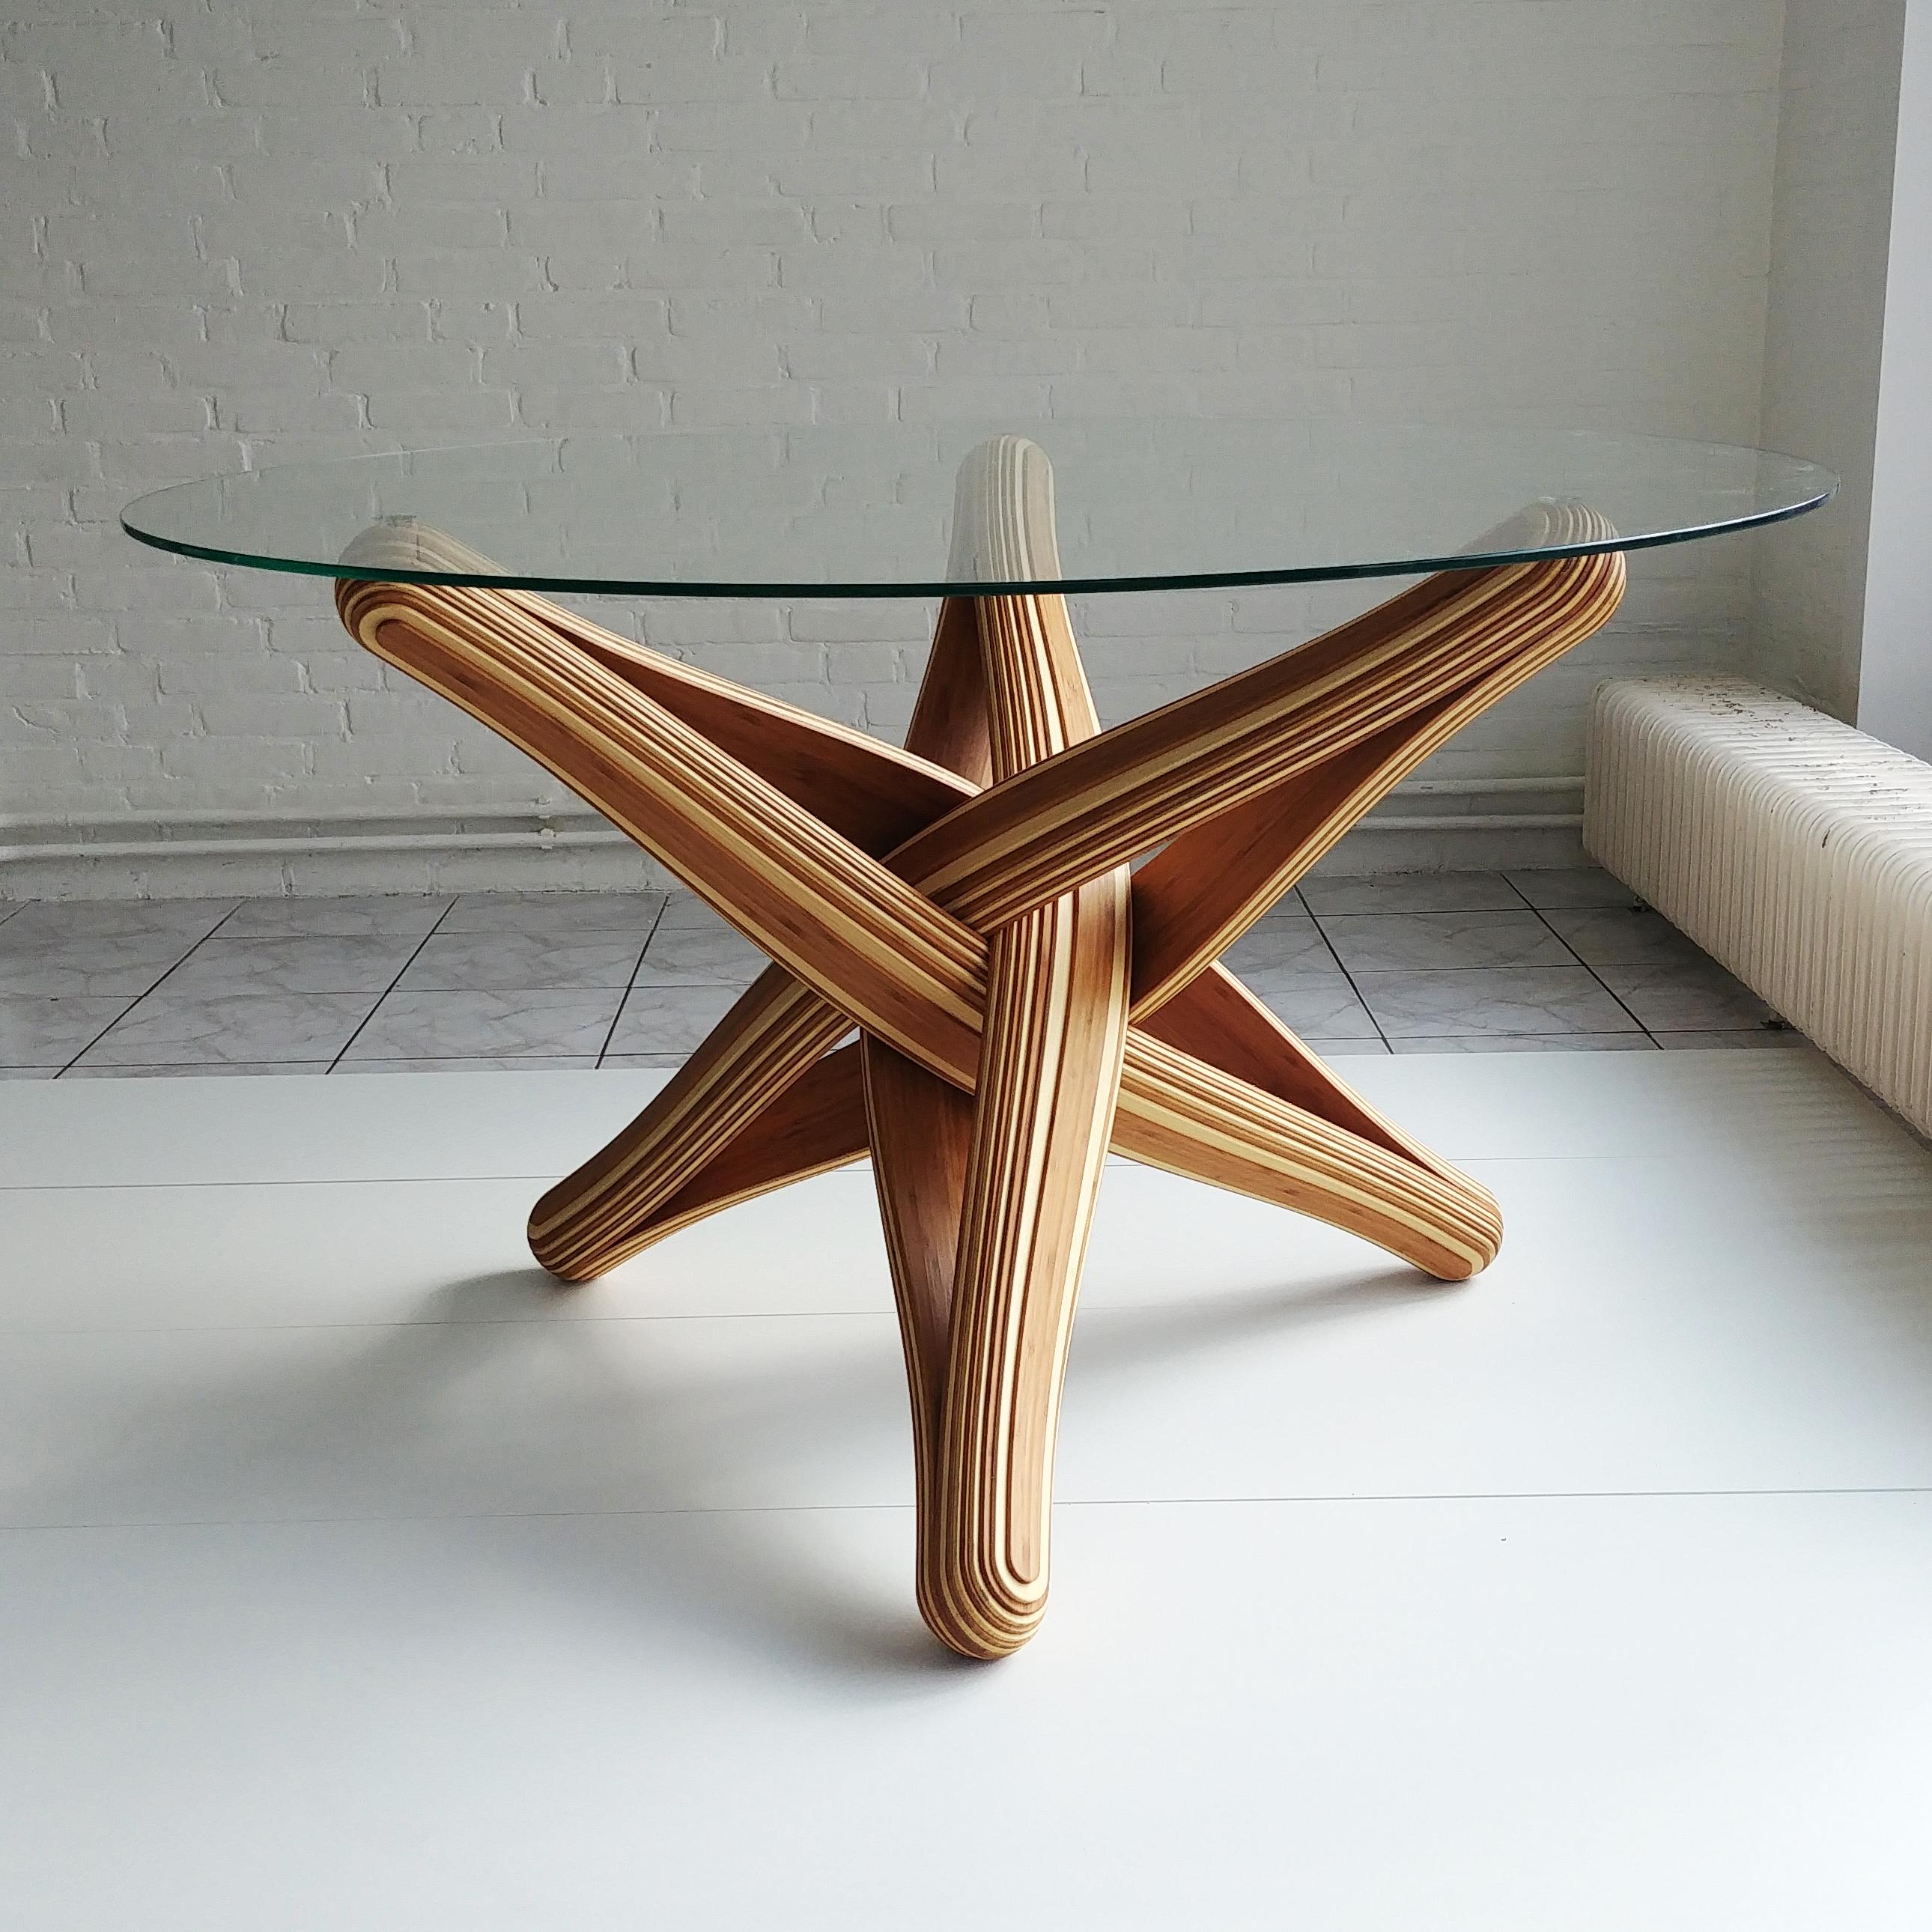 “LOCK” sculptural bamboo dining table is designed out of the qualities, possibilities and characteristics of its material: bamboo.  The frame is build up from pressed layers of flexible bamboo. The shape is formed by the bamboo’s natural bending